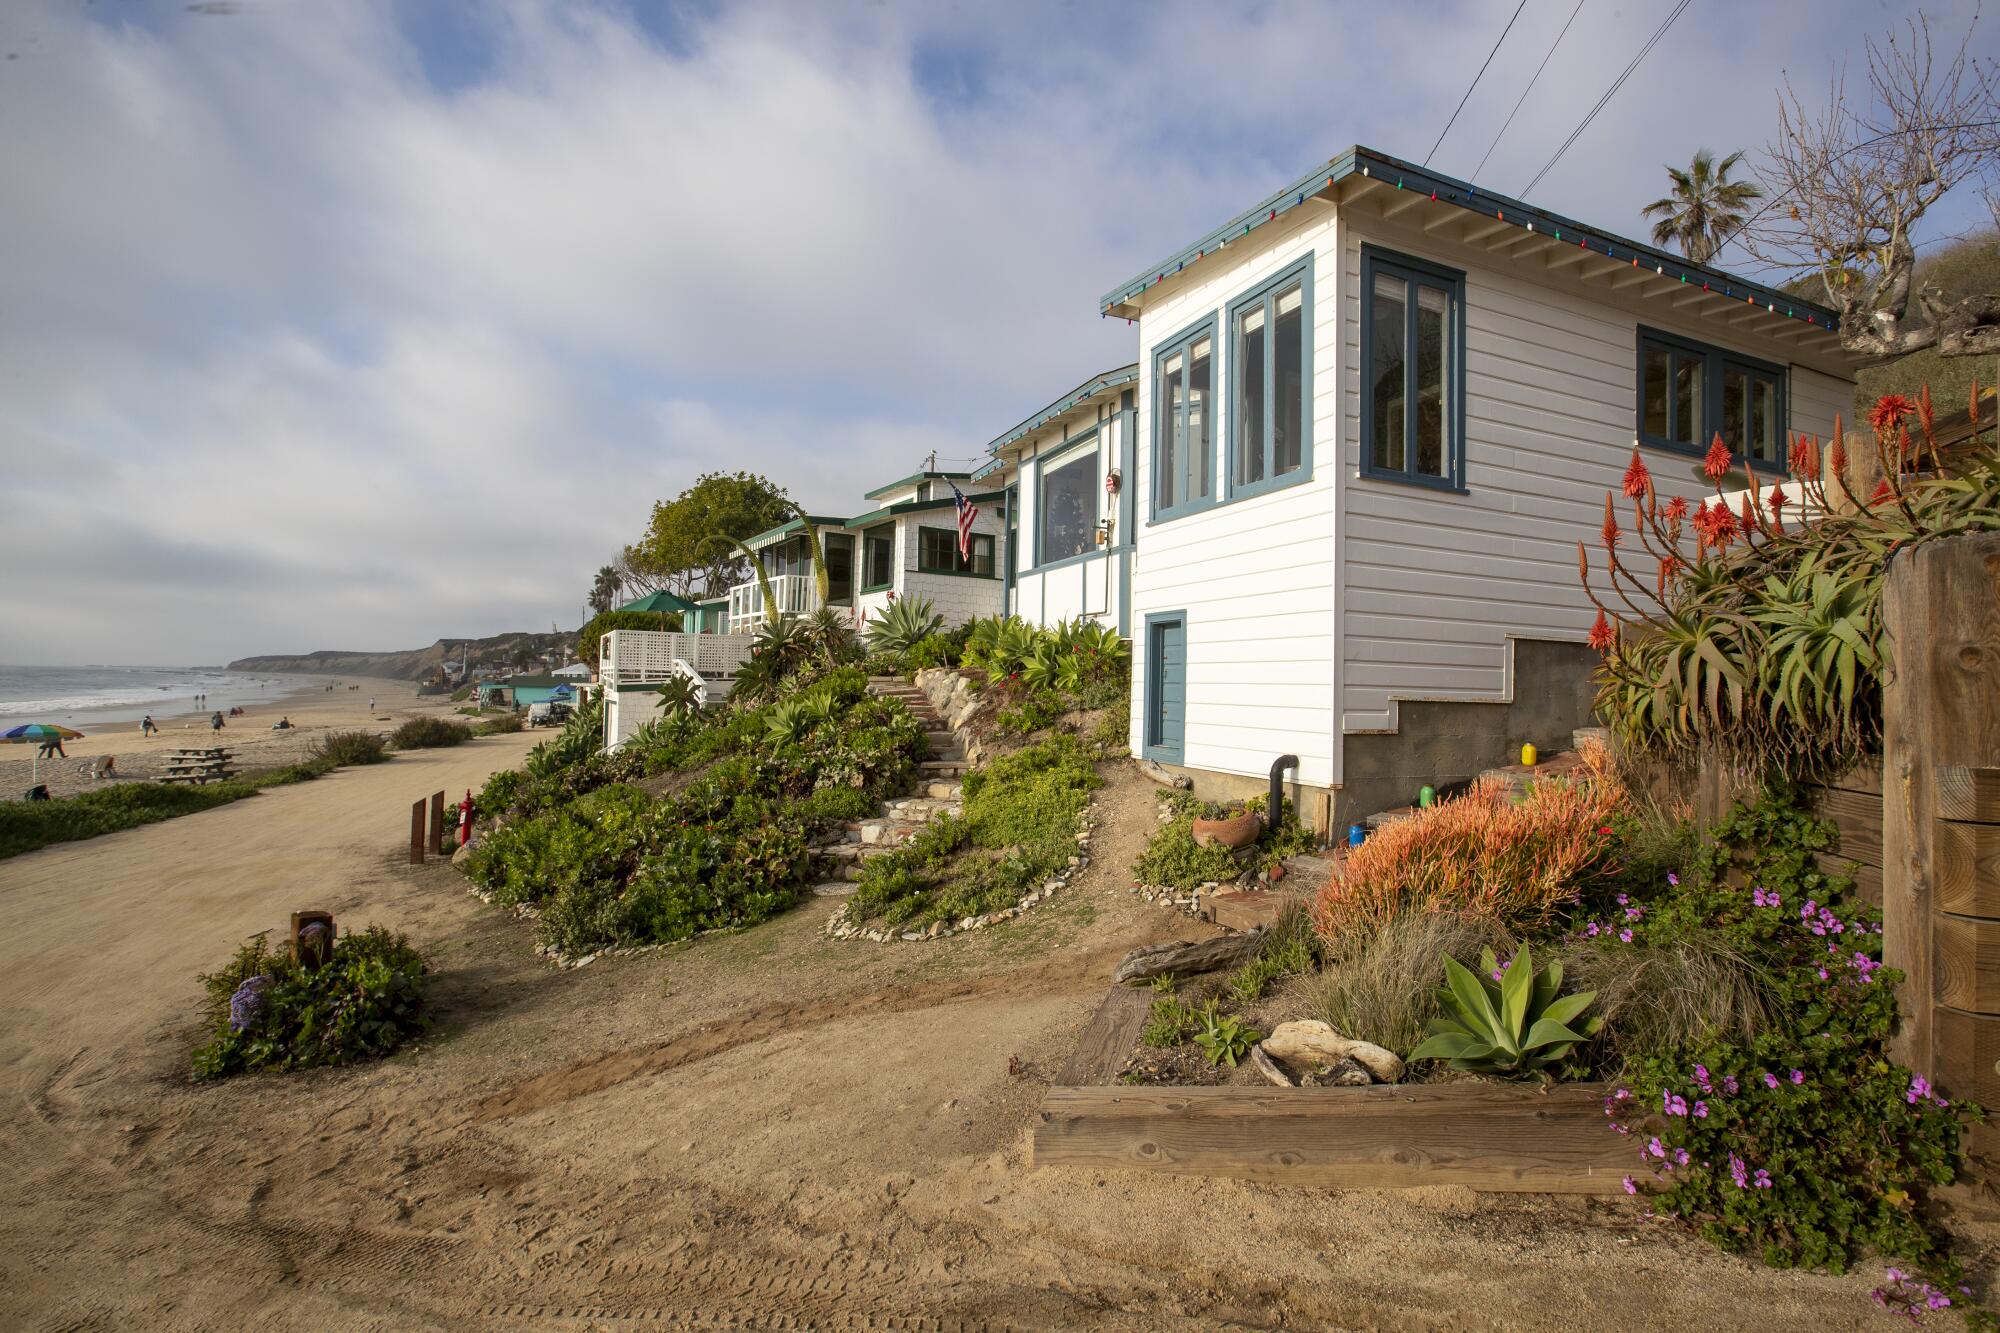 A row of cottages faces the ocean at Crystal Cove State Park